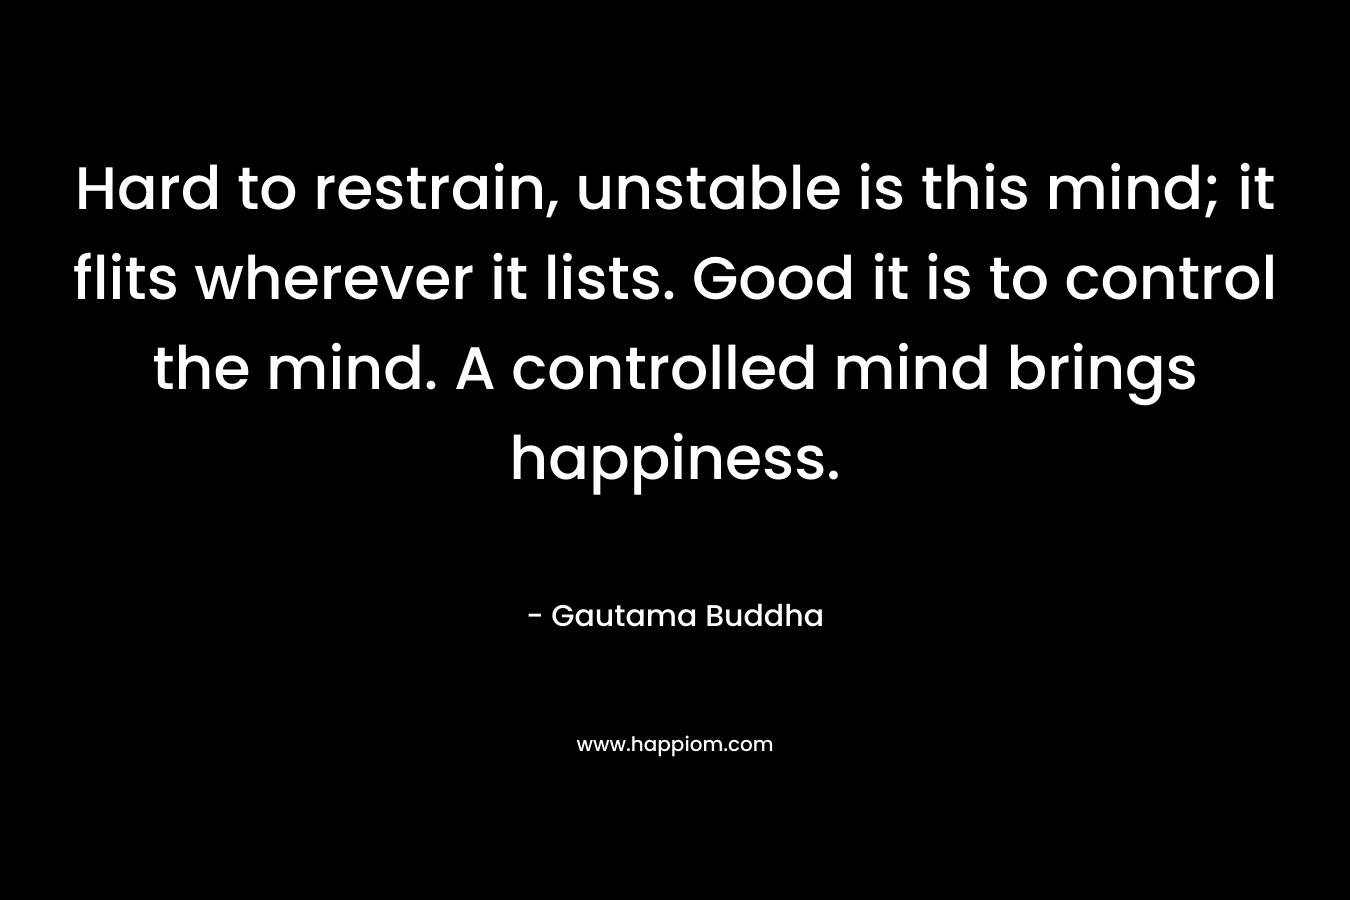 Hard to restrain, unstable is this mind; it flits wherever it lists. Good it is to control the mind. A controlled mind brings happiness. – Gautama Buddha